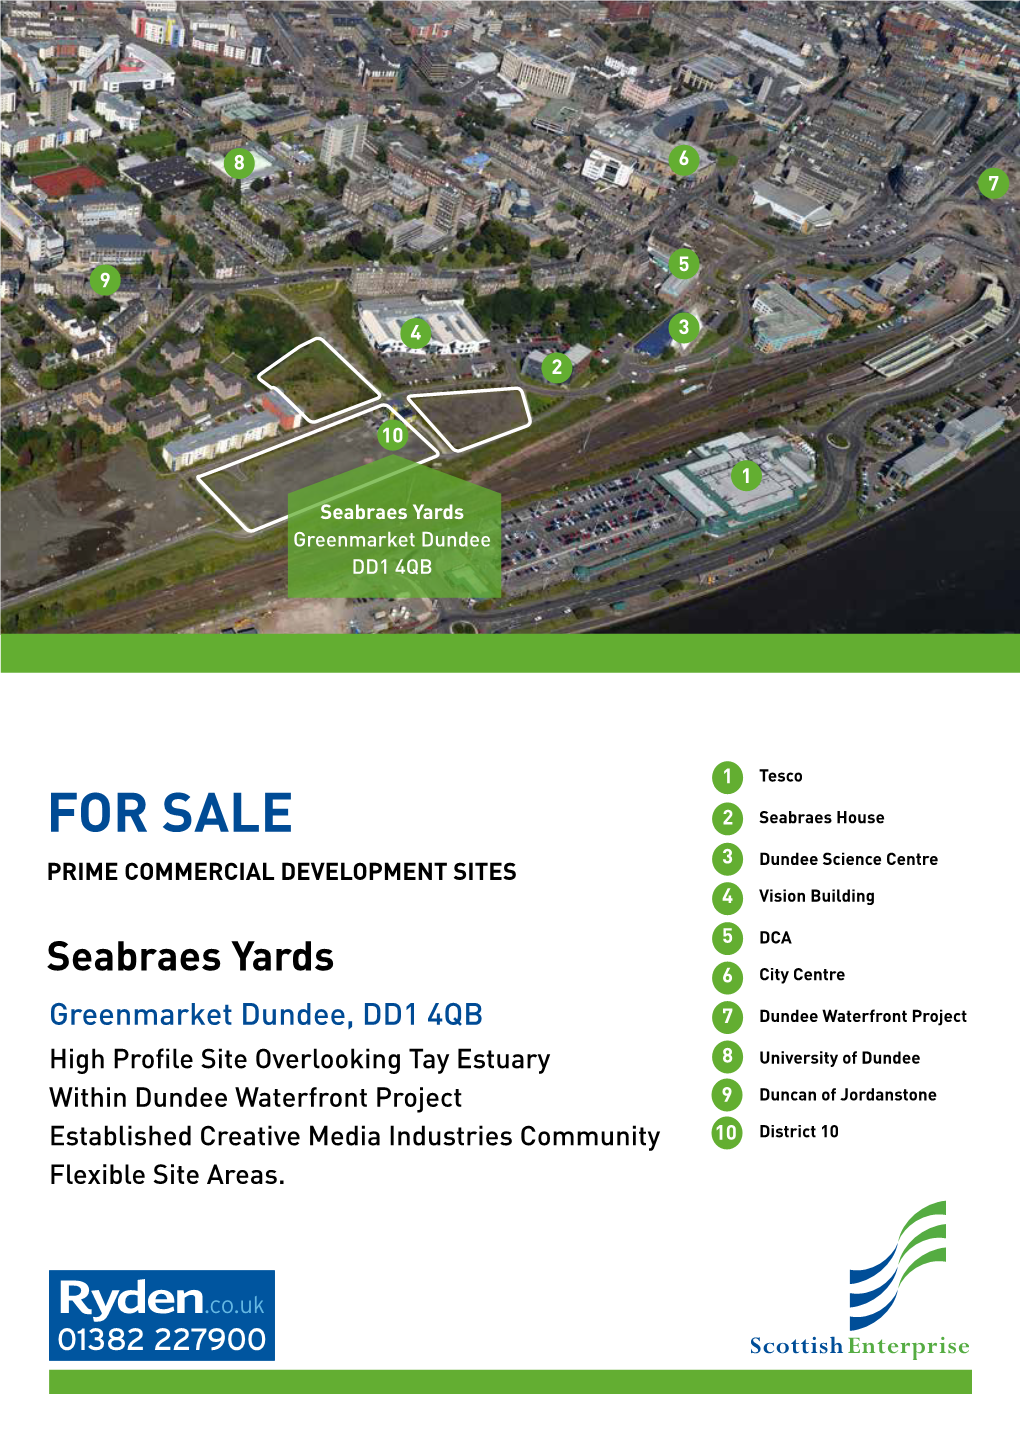 FOR SALE 2 Seabraes House 3 Dundee Science Centre PRIME COMMERCIAL DEVELOPMENT SITES 4 Vision Building